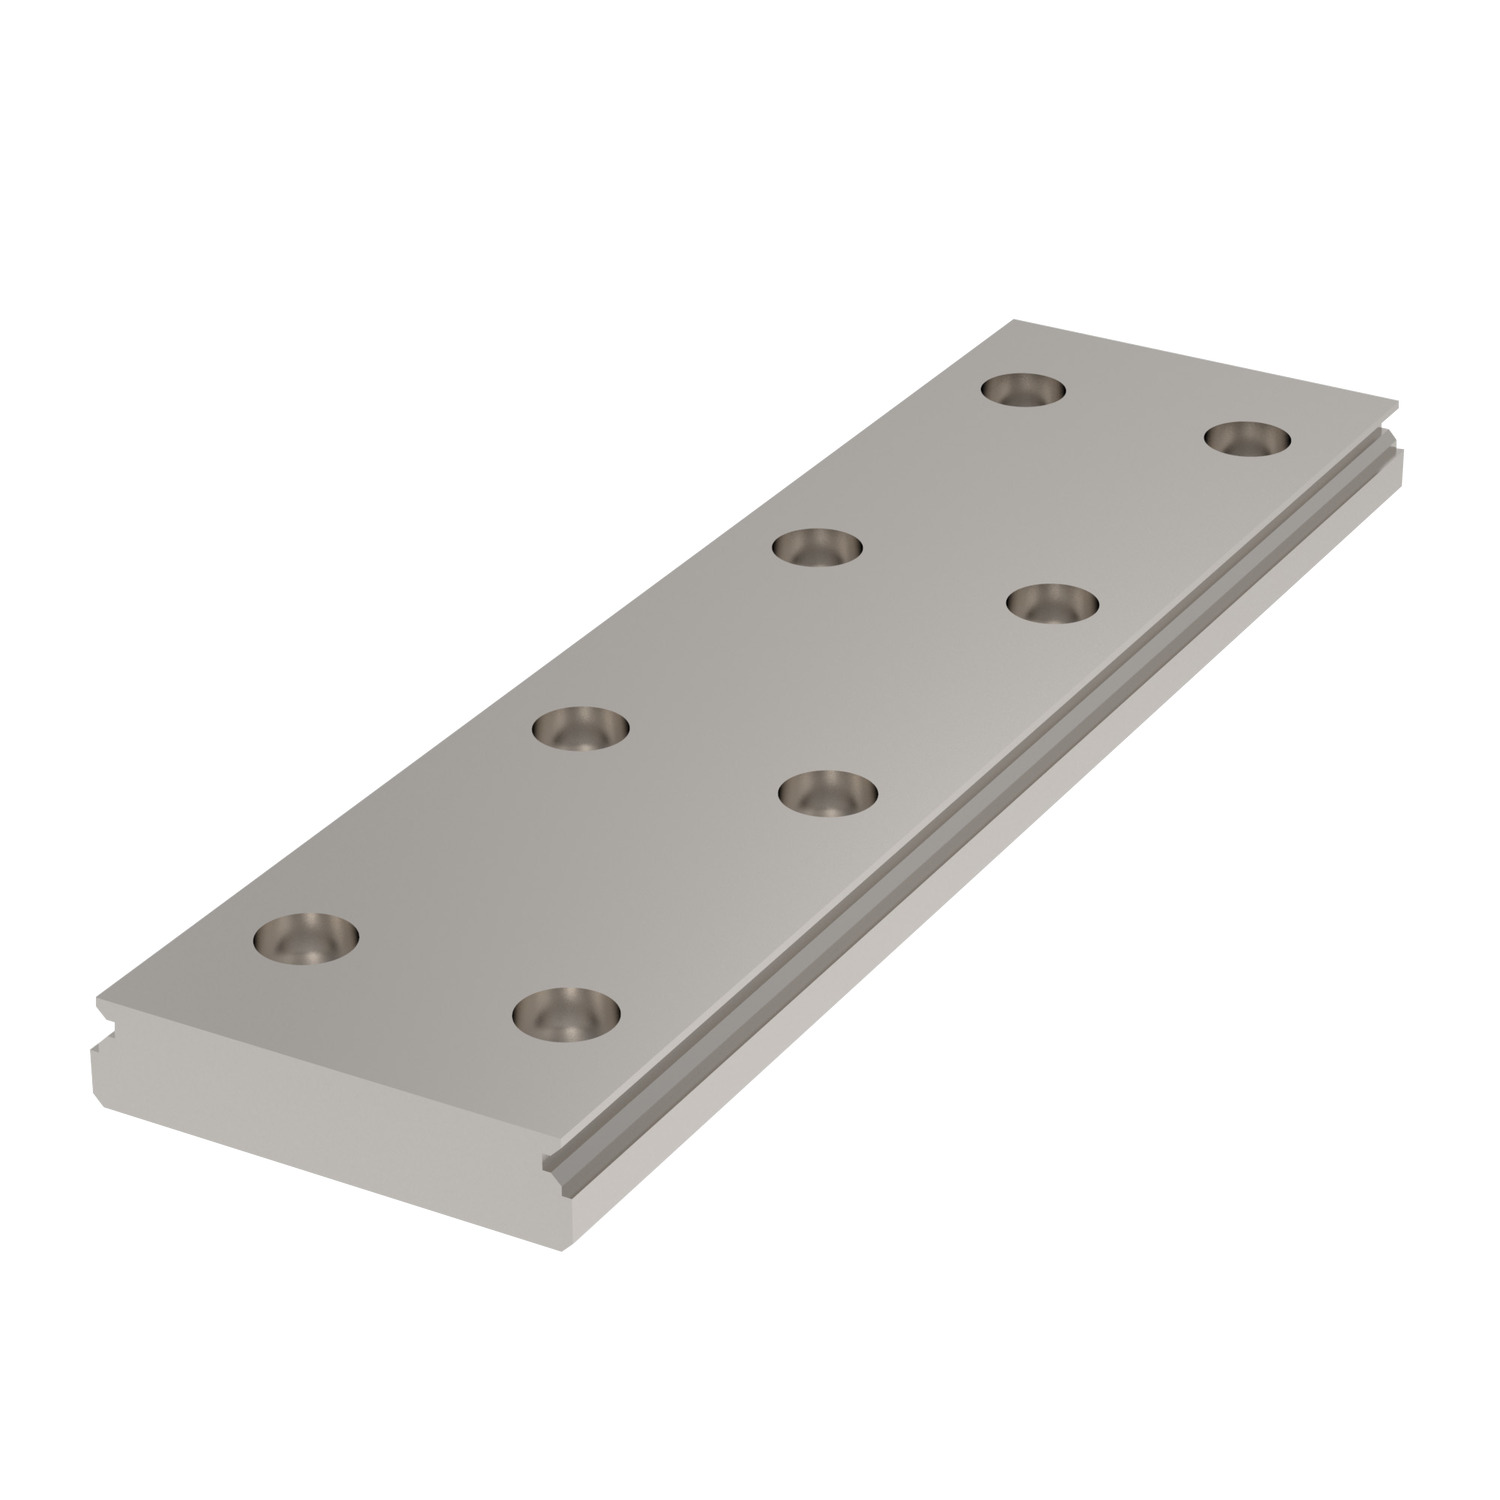 10mm Miniature Linear Rail Miniature stainless linear guideway carriages. Wide version..